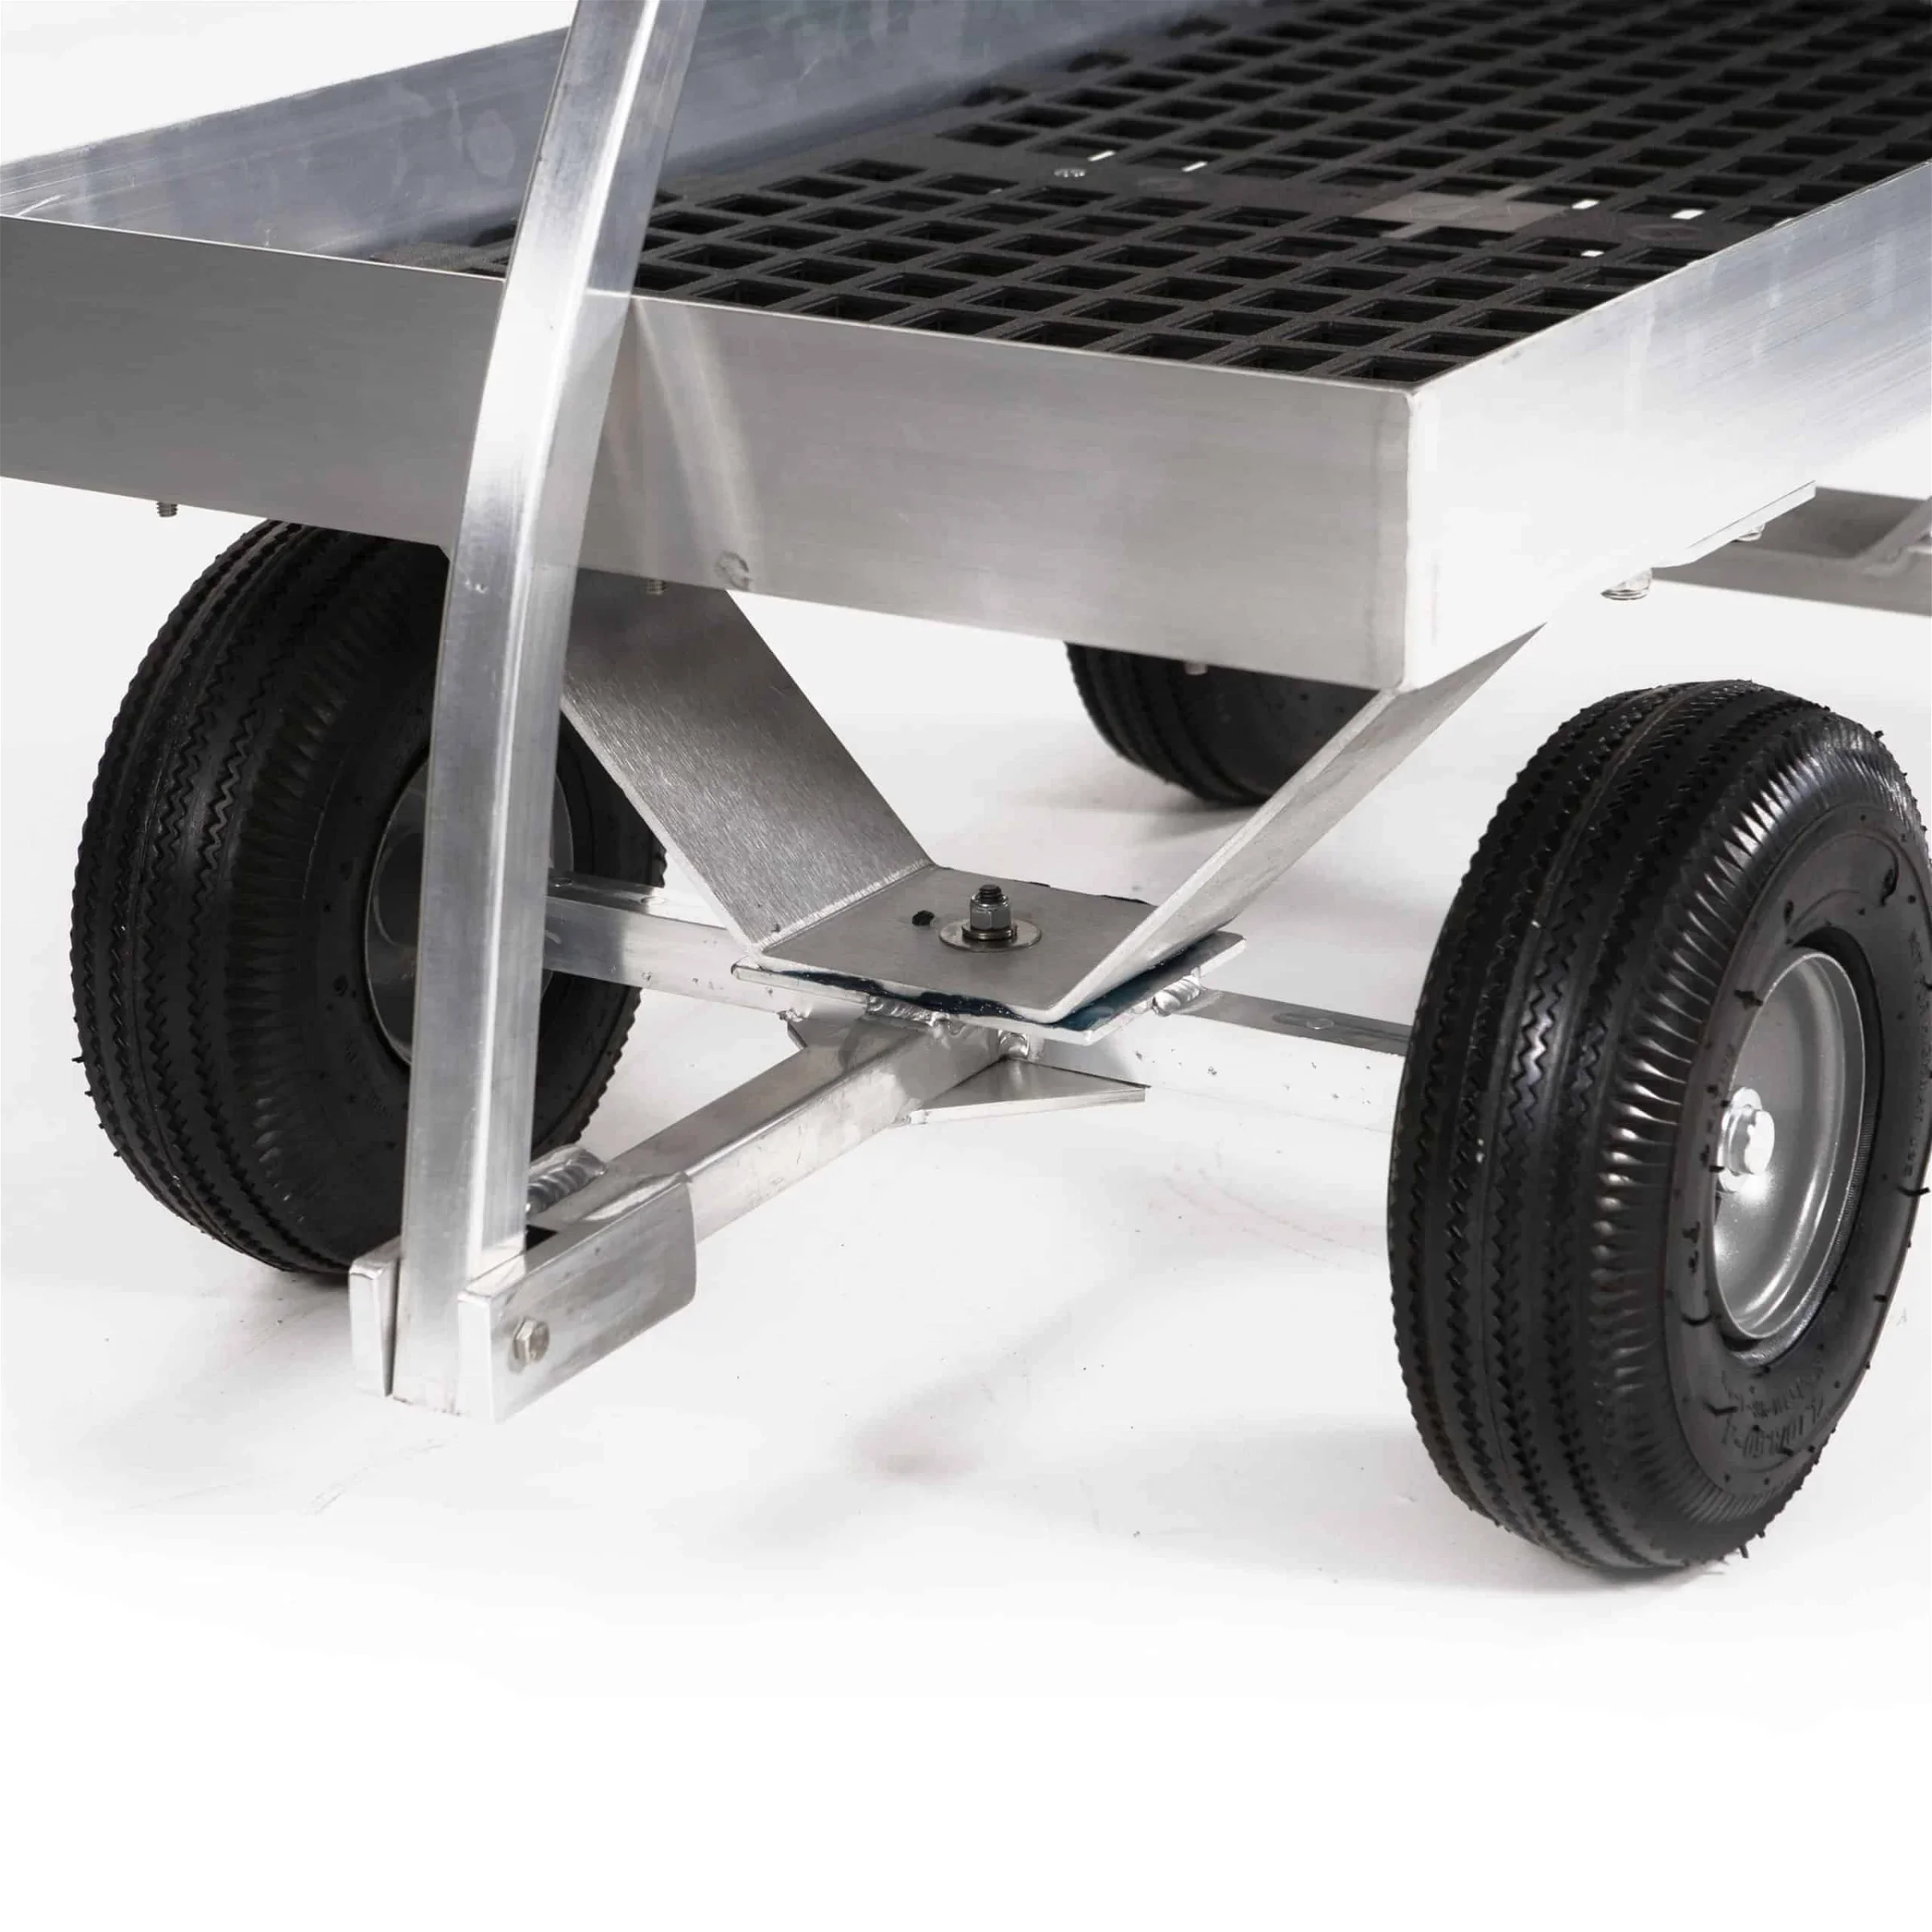 CYPRESS “JUNIOR” WAGON with UV protected decking with drain holes.